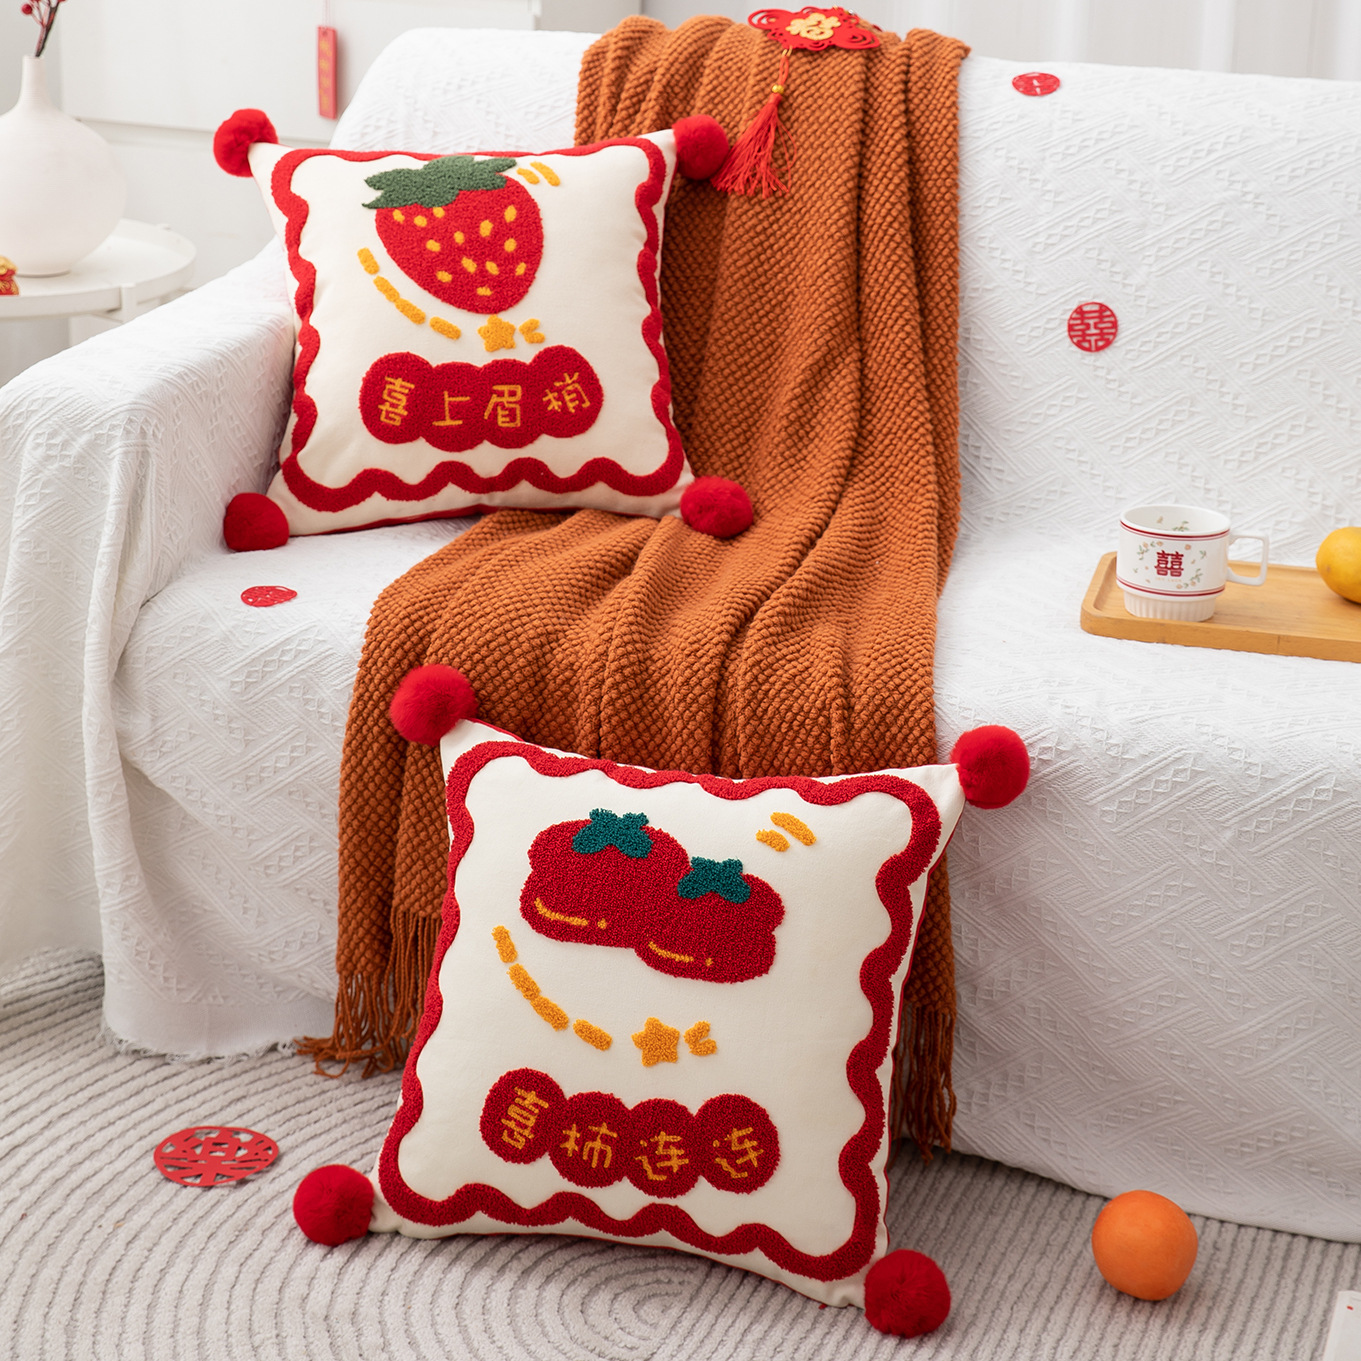 Original Festive Wedding and Wedding Room Decoration Bedside and Sofa Pillow Wedding Plush Xi Persimmon Three-Dimensional Embroidered Xi Character Pillow